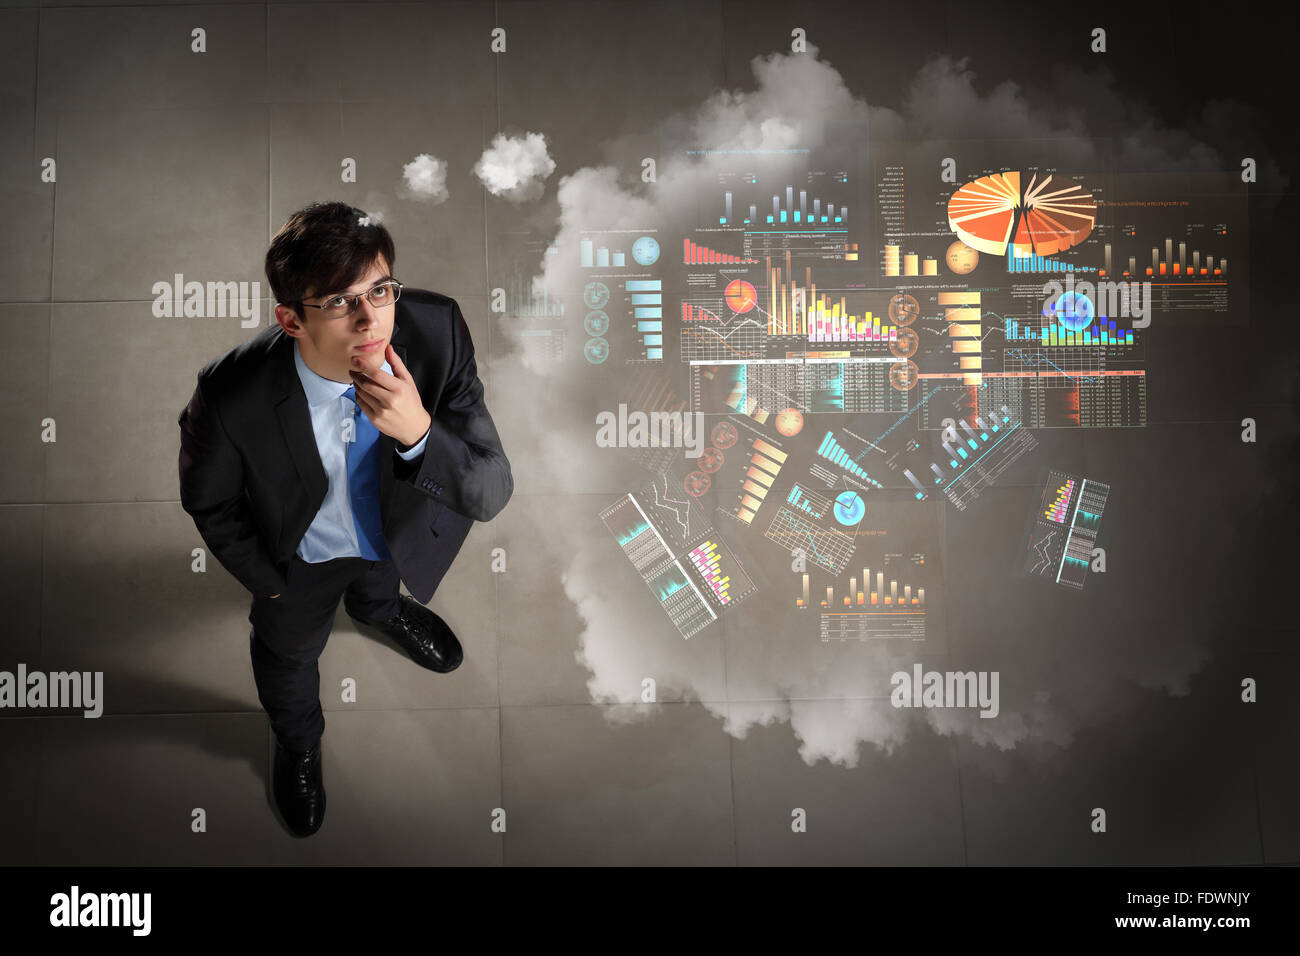 Top view of young businessman making decision diagram in air Stock Photo